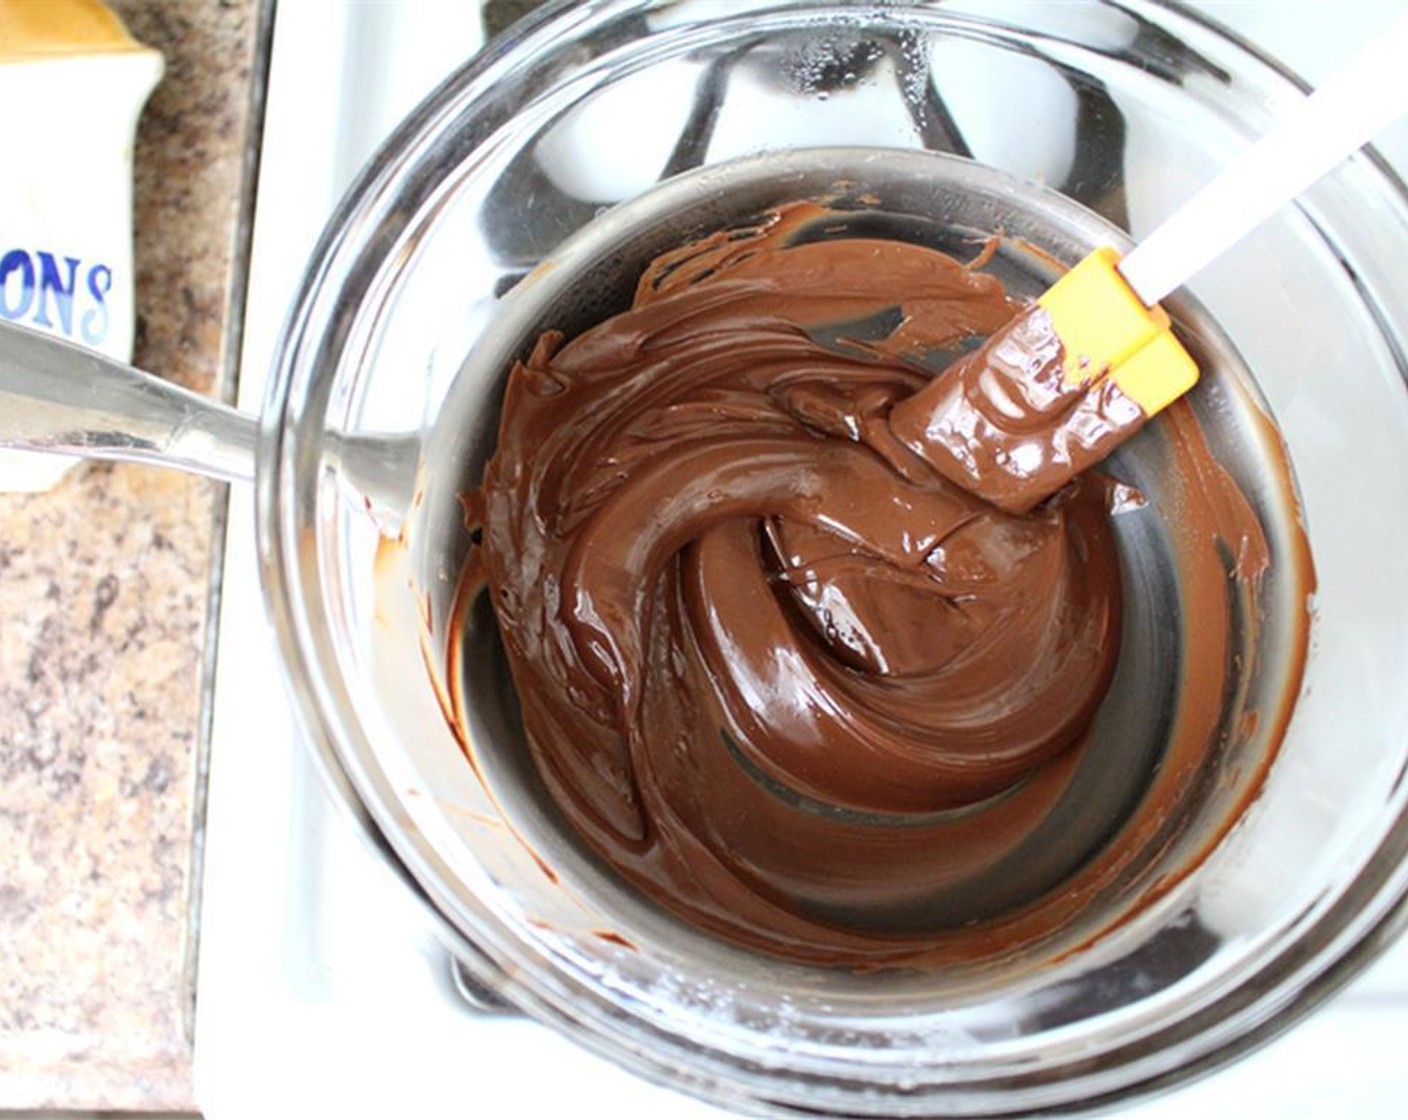 step 6 Add 46% Cacao Chocolate (1 cup) the bowl and stir occasionally until chocolate is melted. Remove from heat.